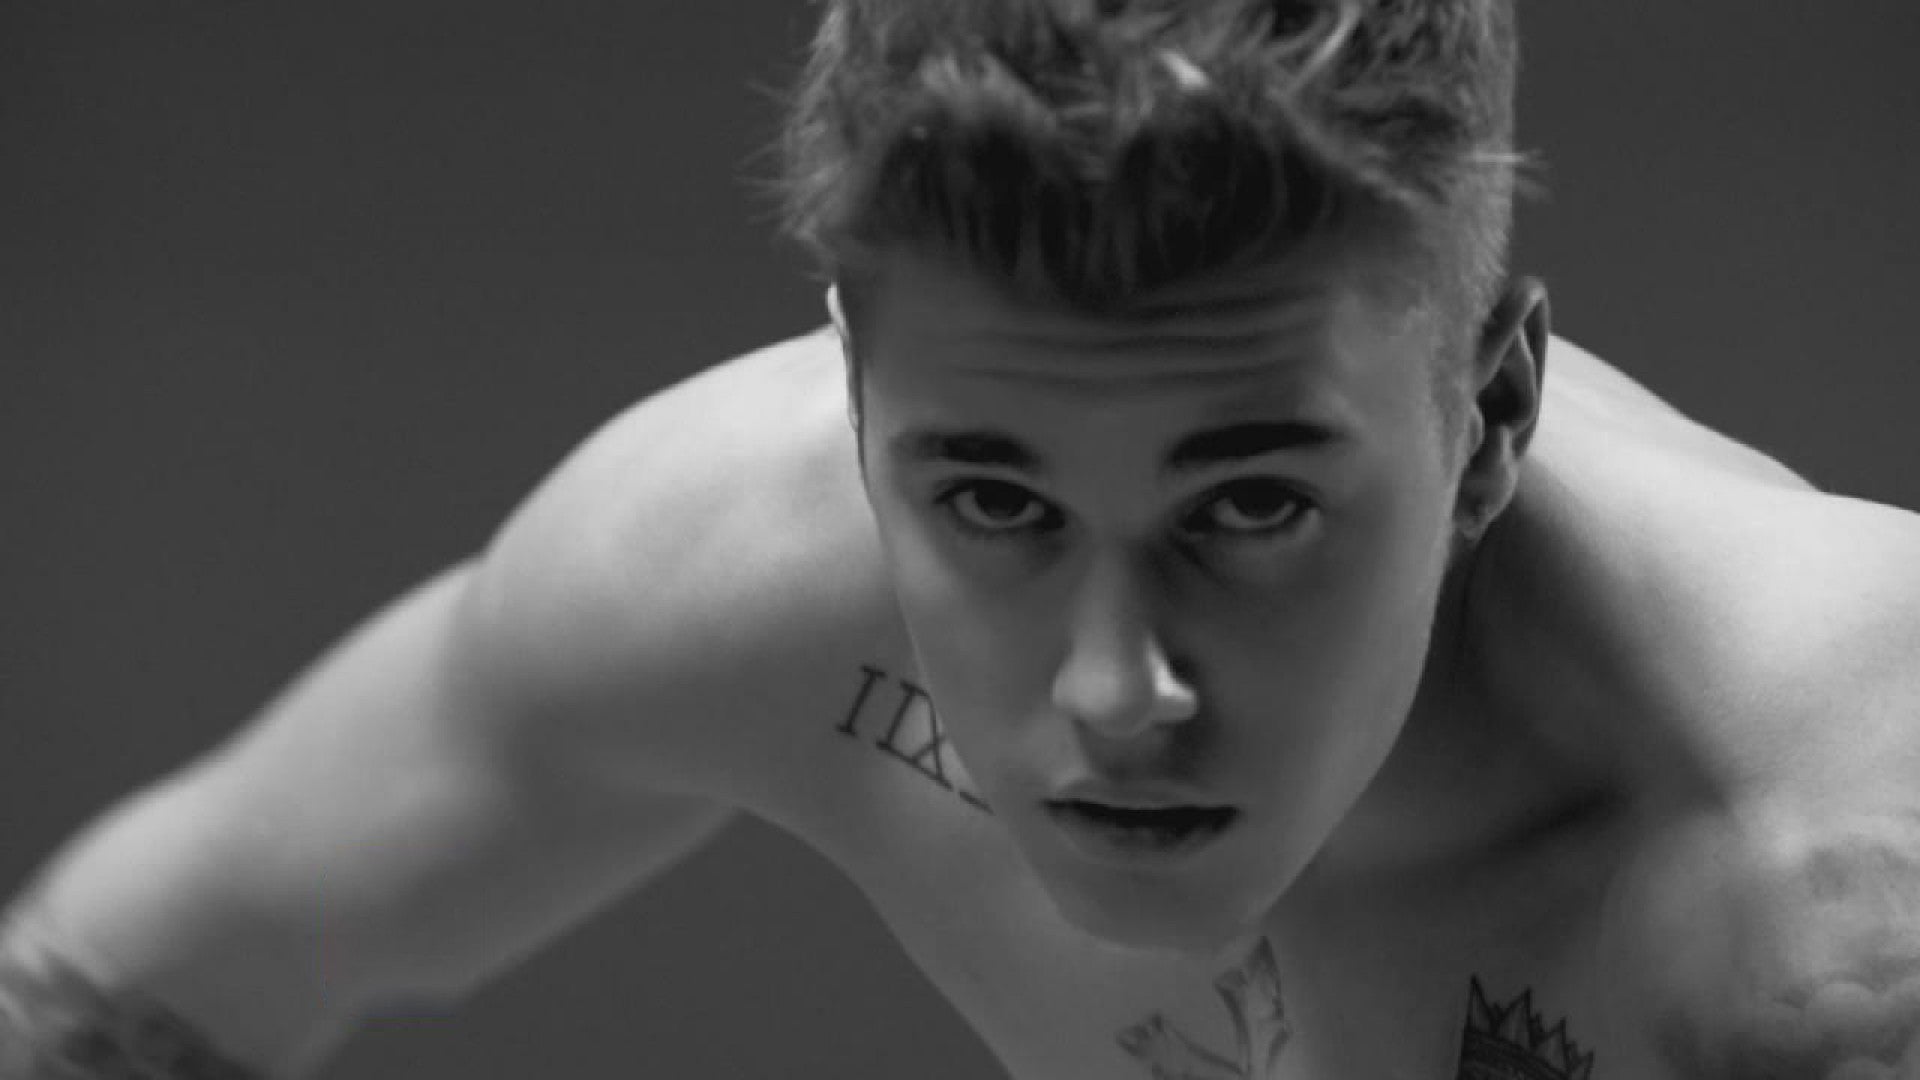 Justin Nude - 2015: The Year We Saw Justin Bieber Naked, and He was Only Sort of OK With  It